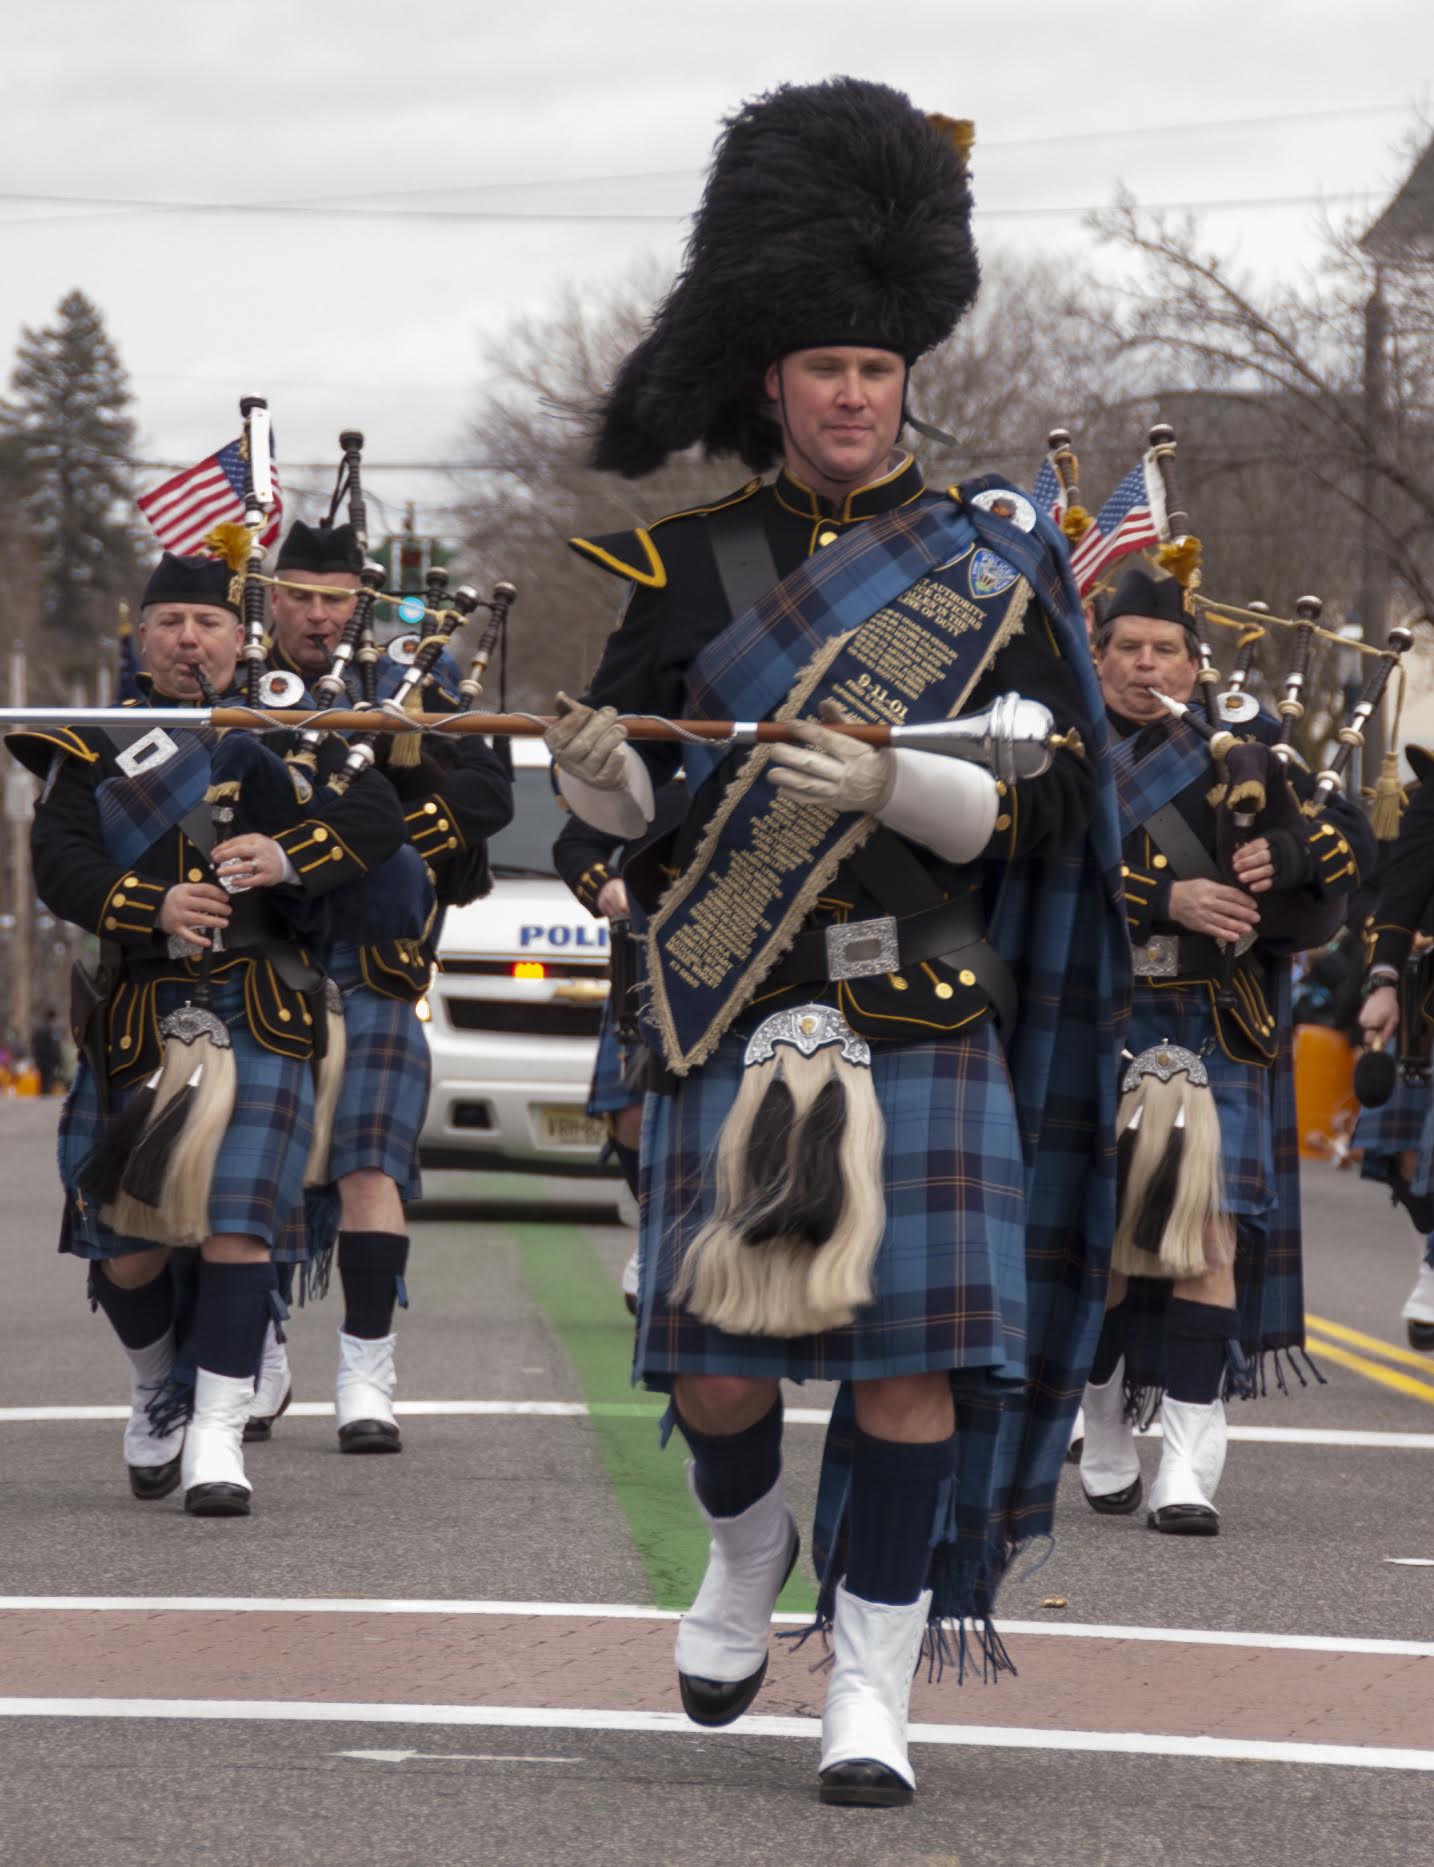 HAPPY ST. PATRICK’S DAY—ROCKLAND’S BIGGEST PARTY OF THE YEAR IS THIS WEEKEND